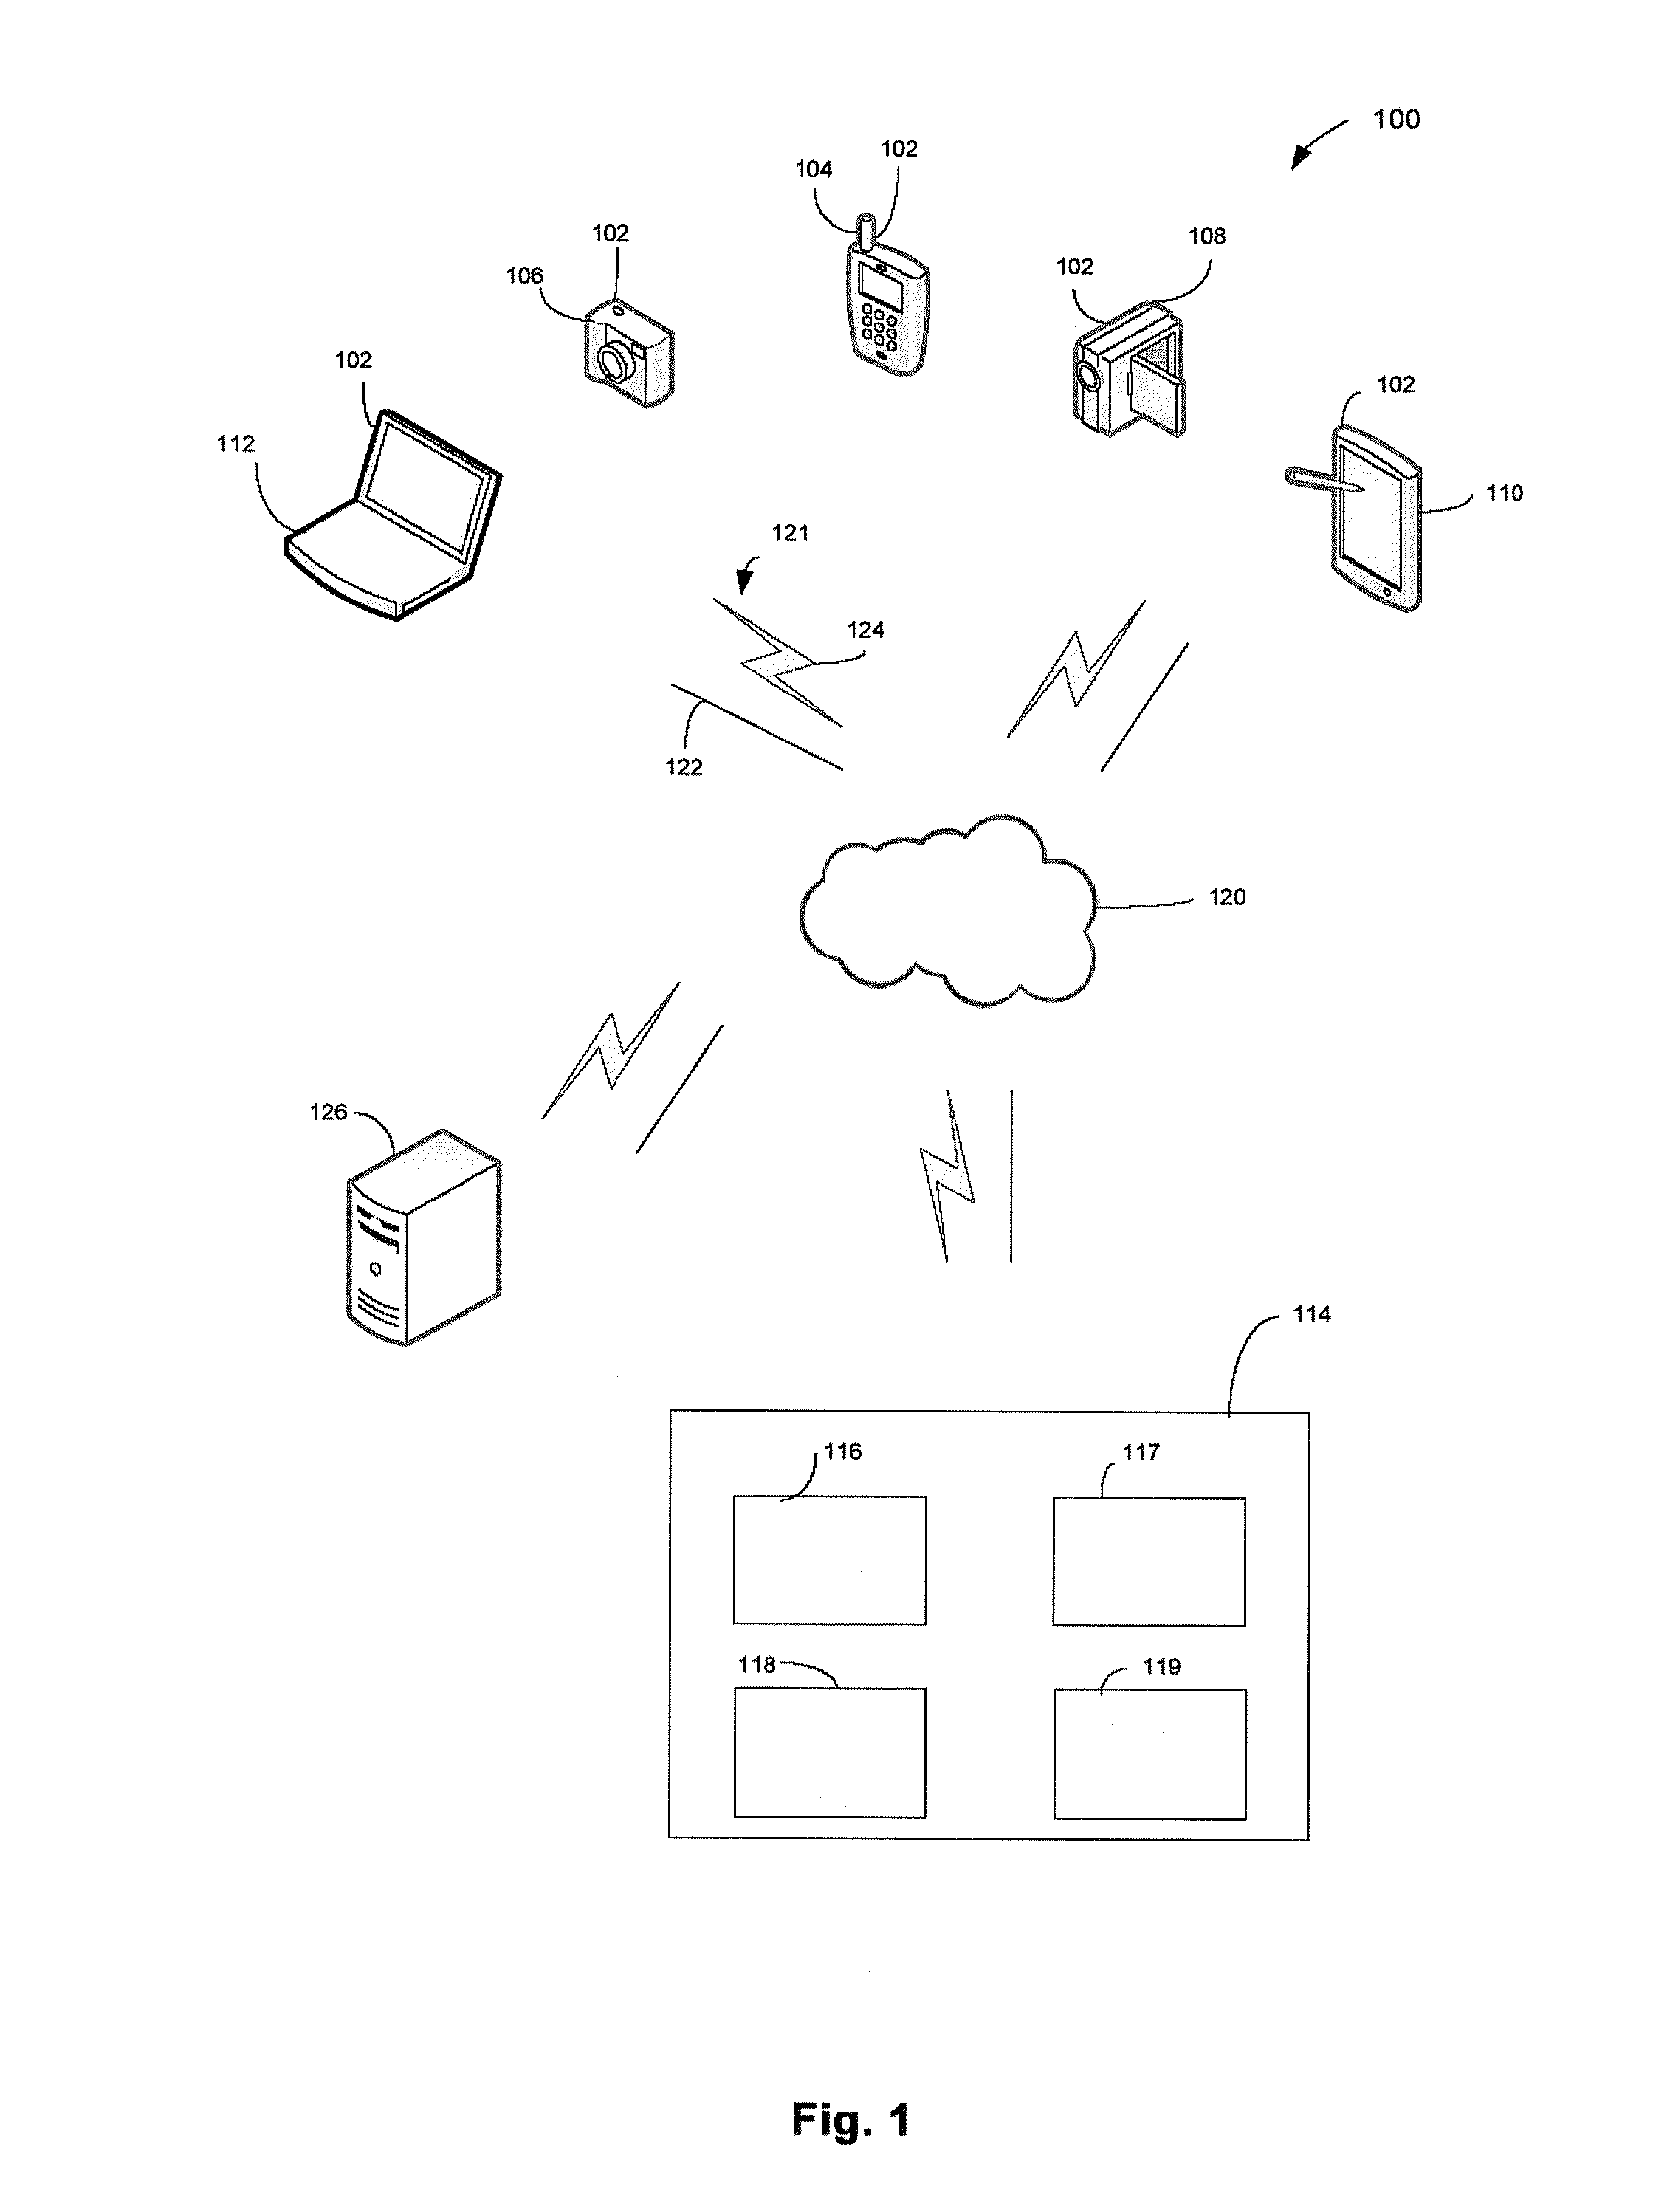 Systems and methods for removing defects from images